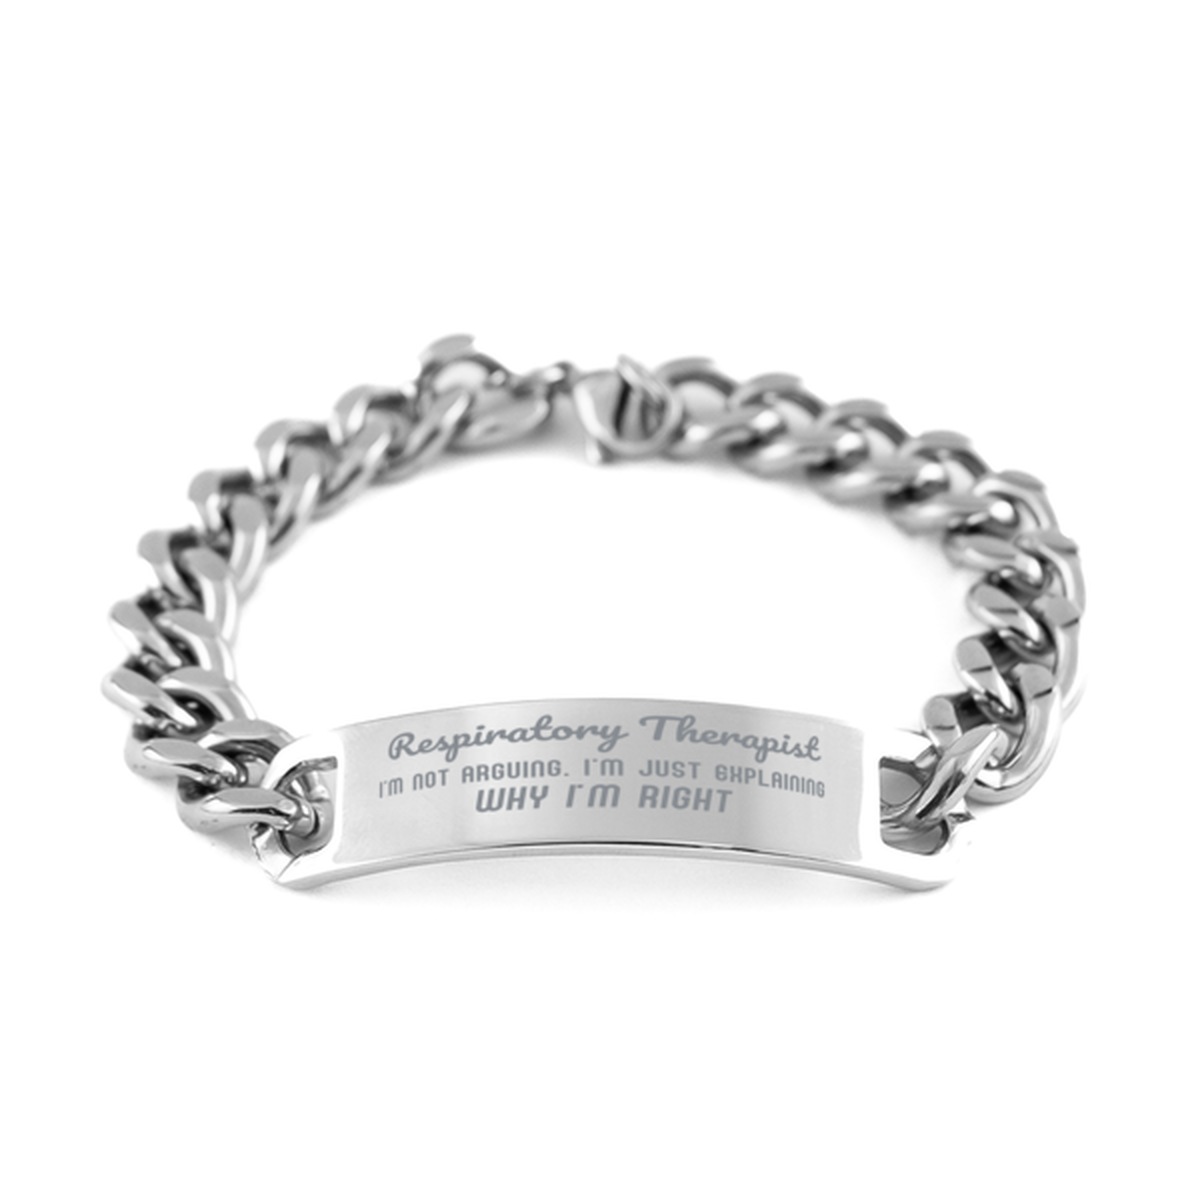 Respiratory Therapist I'm not Arguing. I'm Just Explaining Why I'm RIGHT Cuban Chain Stainless Steel Bracelet, Graduation Birthday Christmas Respiratory Therapist Gifts For Respiratory Therapist Funny Saying Quote Present for Men Women Coworker